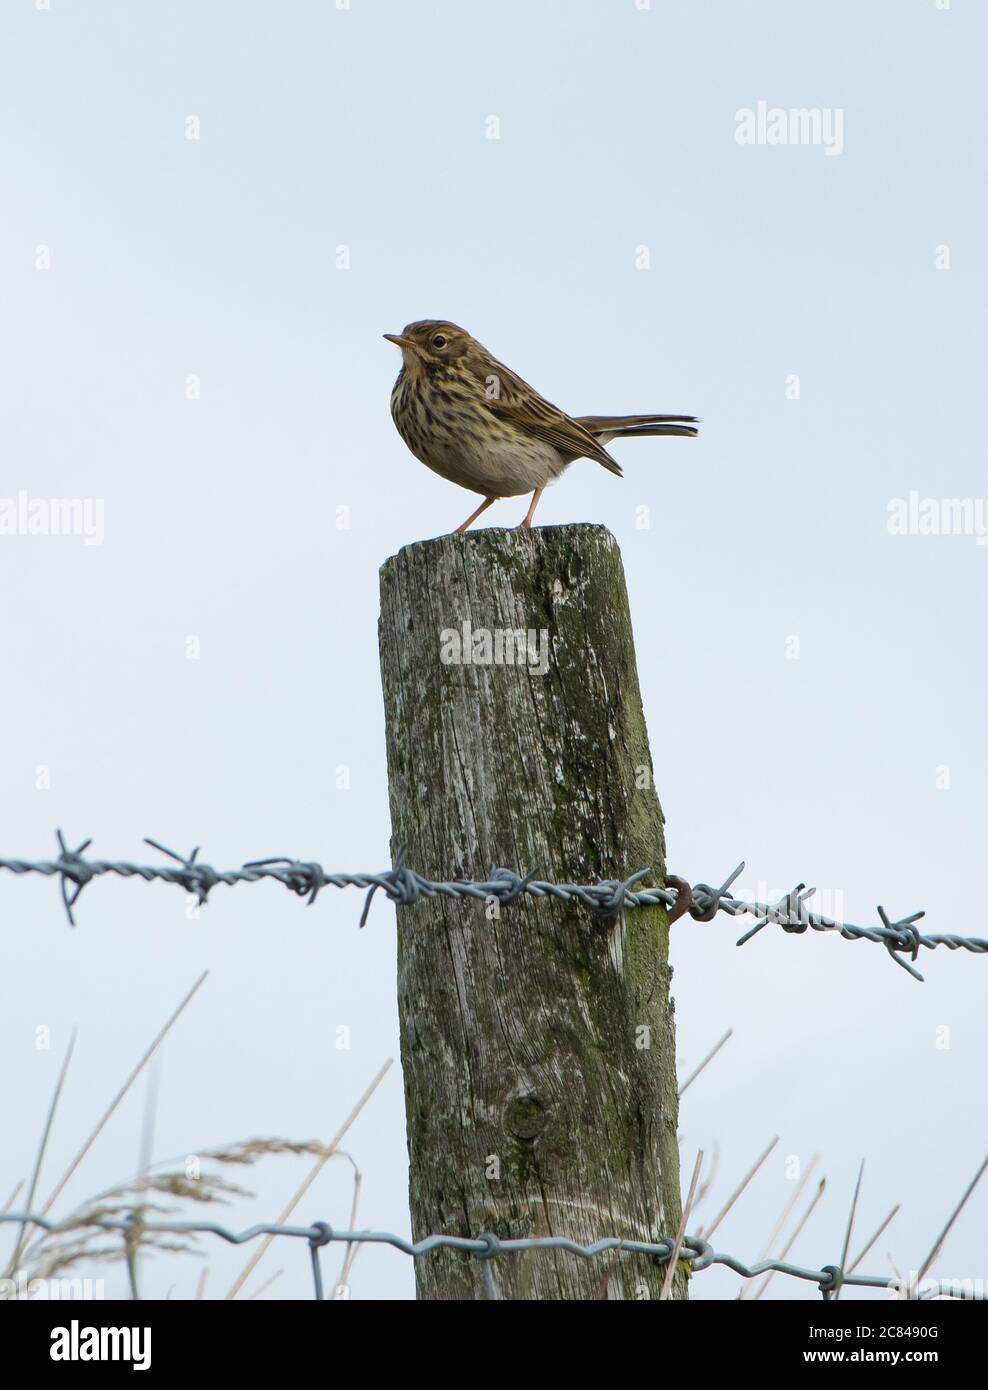 A Meadow pipit on a fence post, Chipping, Preston, Lancashire, UK Stock Photo